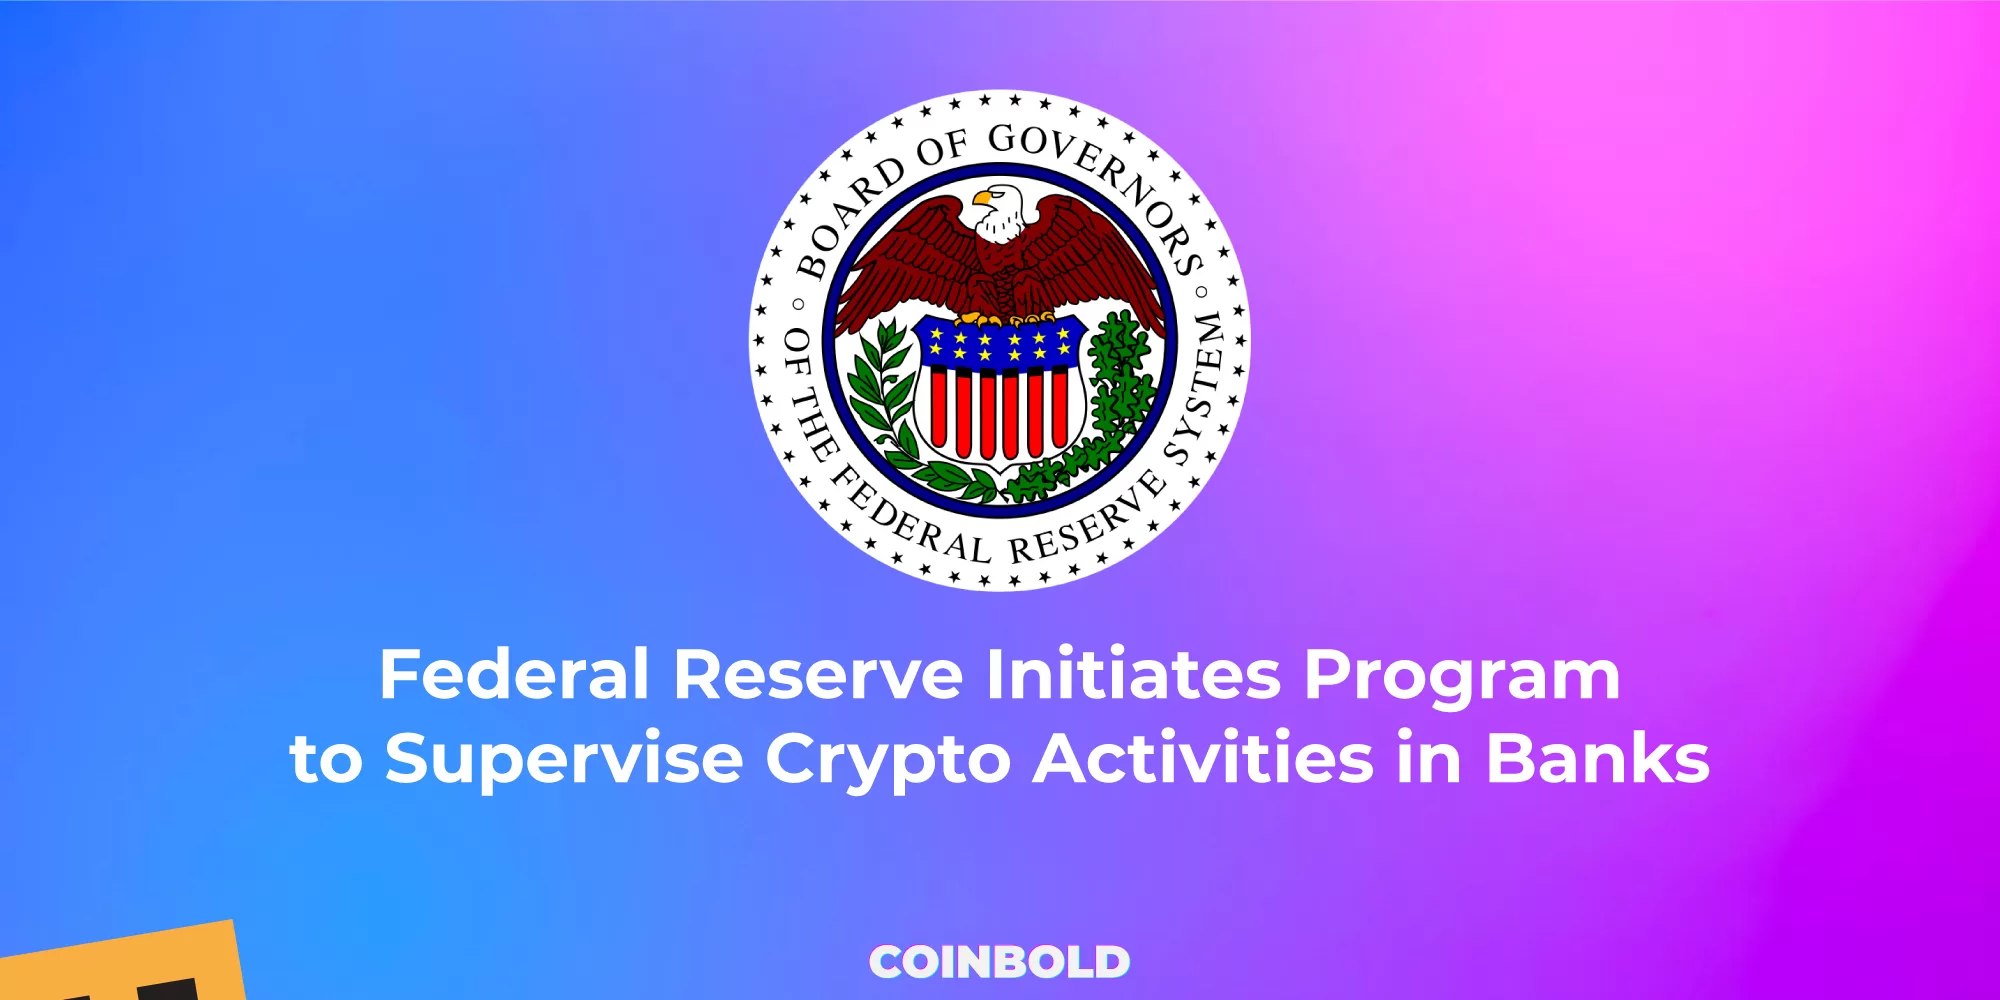 Federal Reserve Initiates Program to Supervise Crypto Activities in Banks